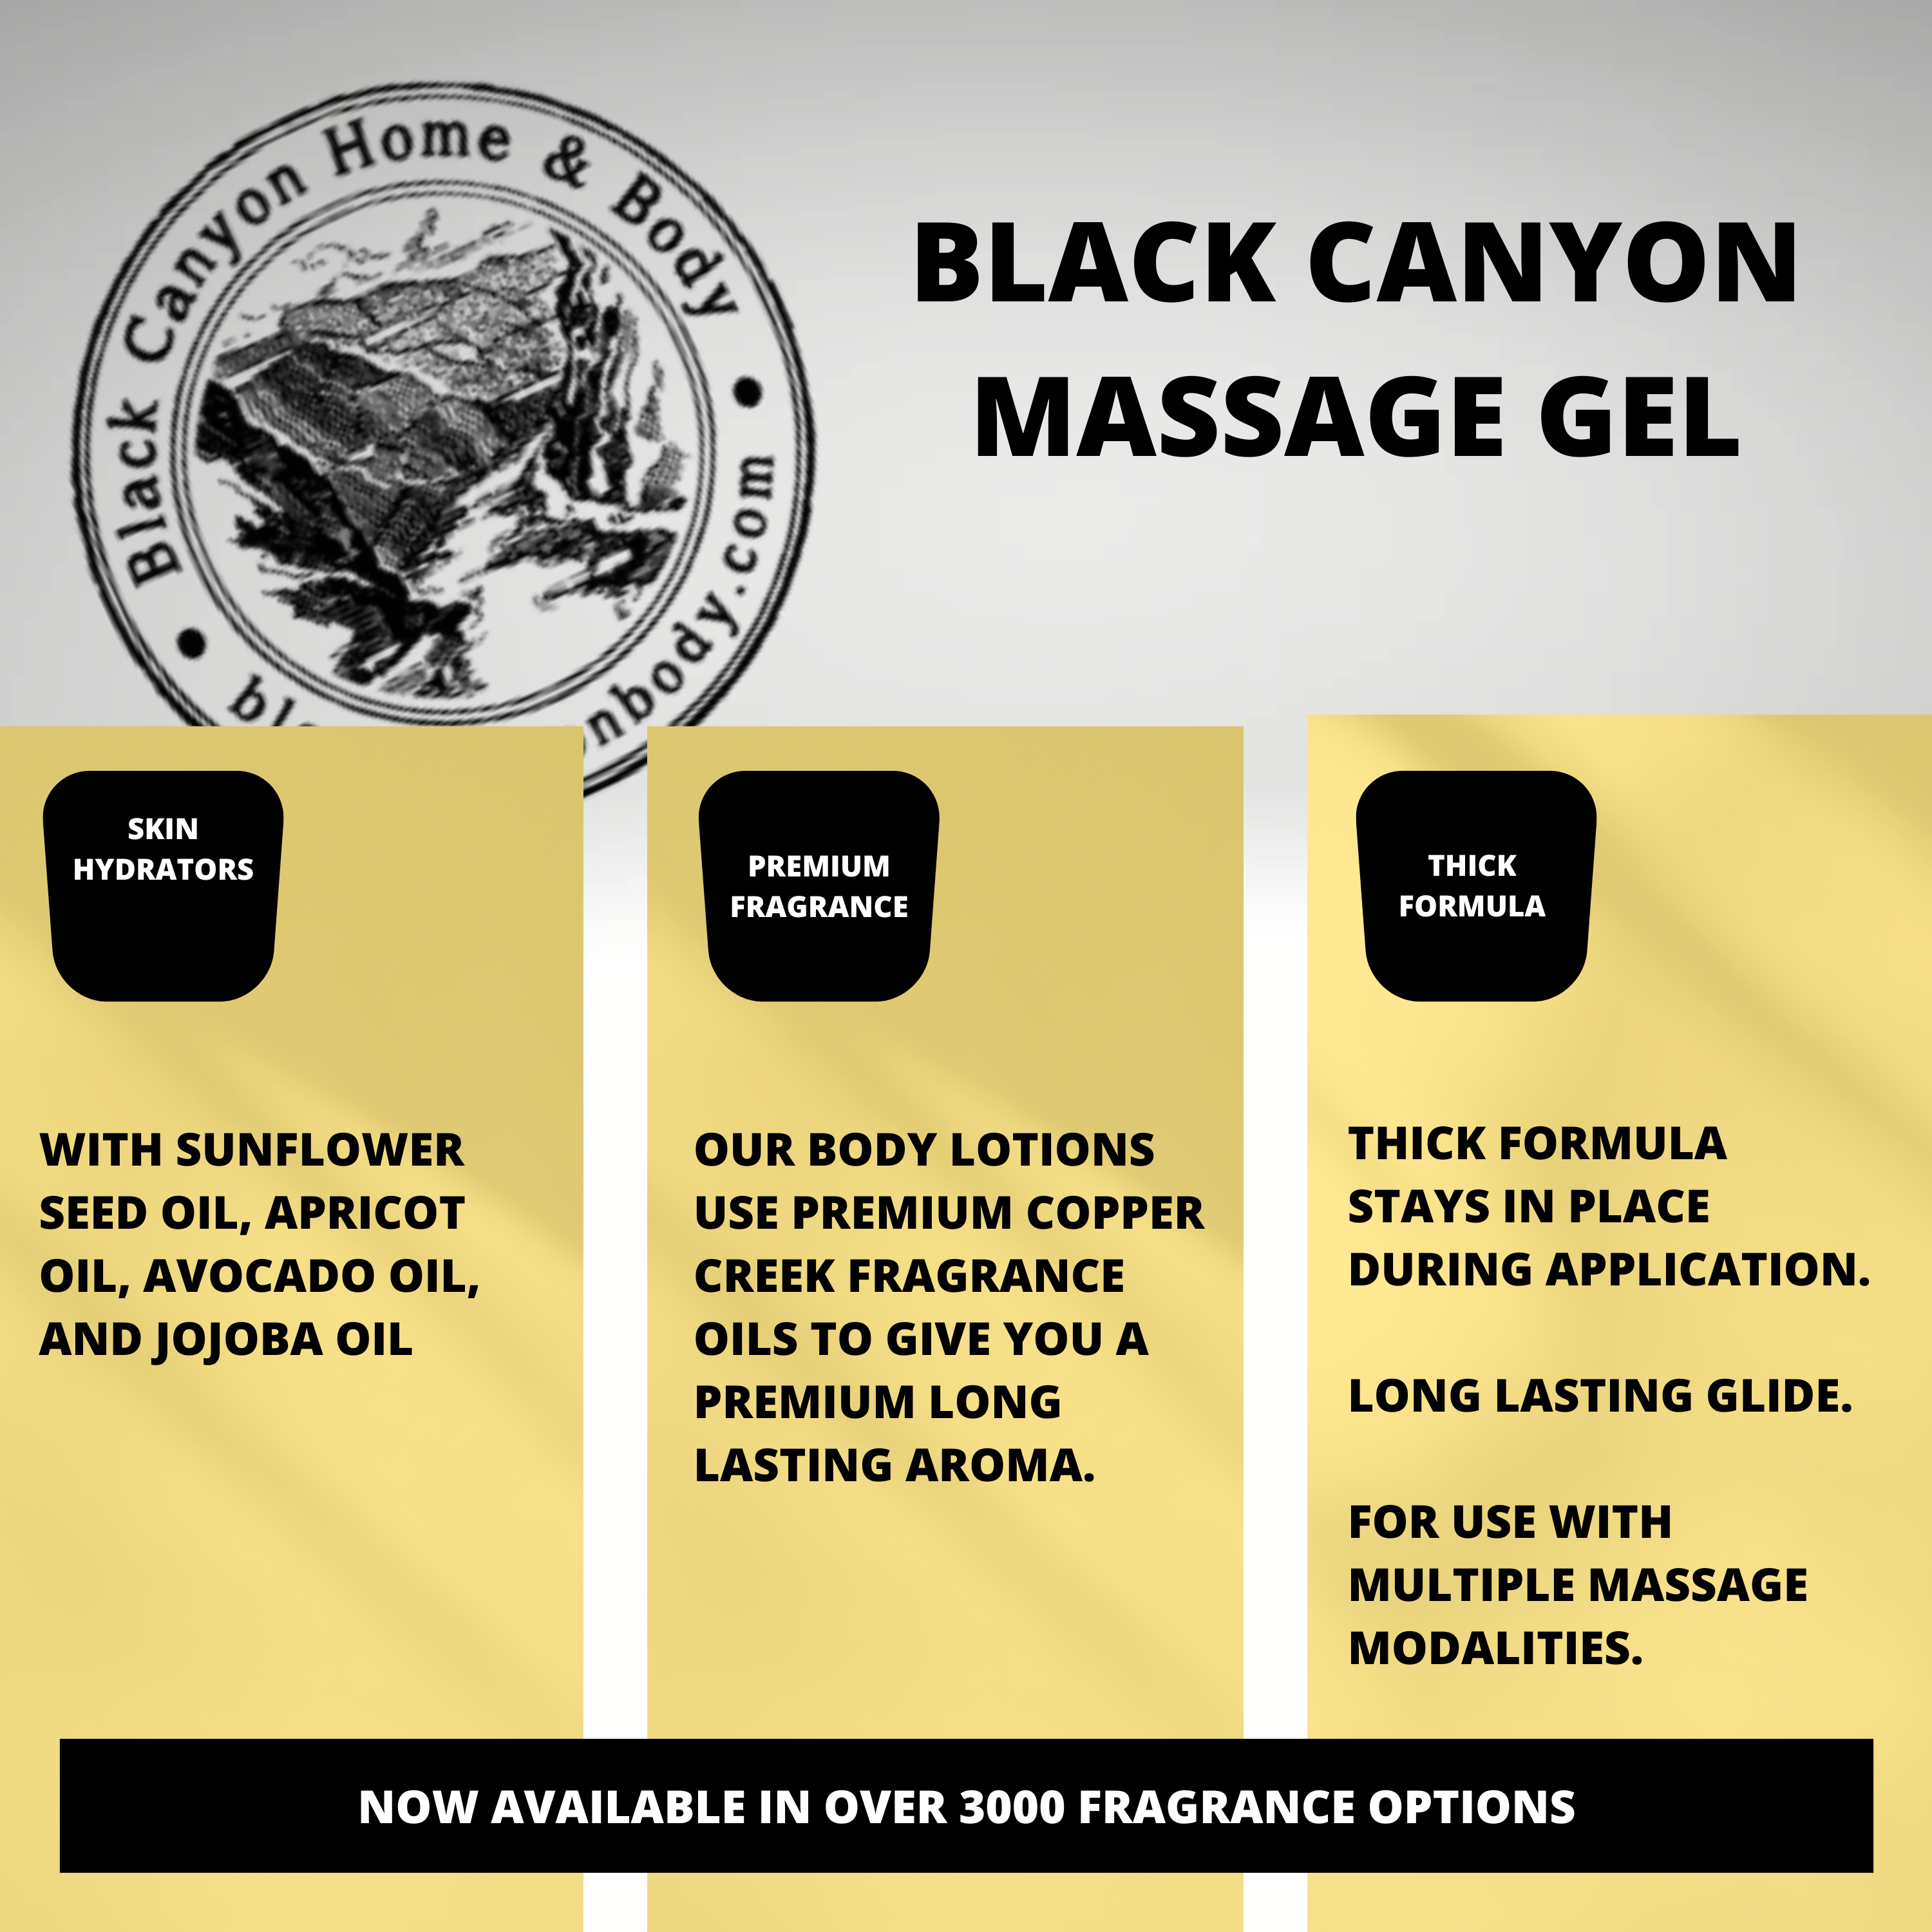 Black Canyon White Chocolate & Watermelon Scented Massage Gel